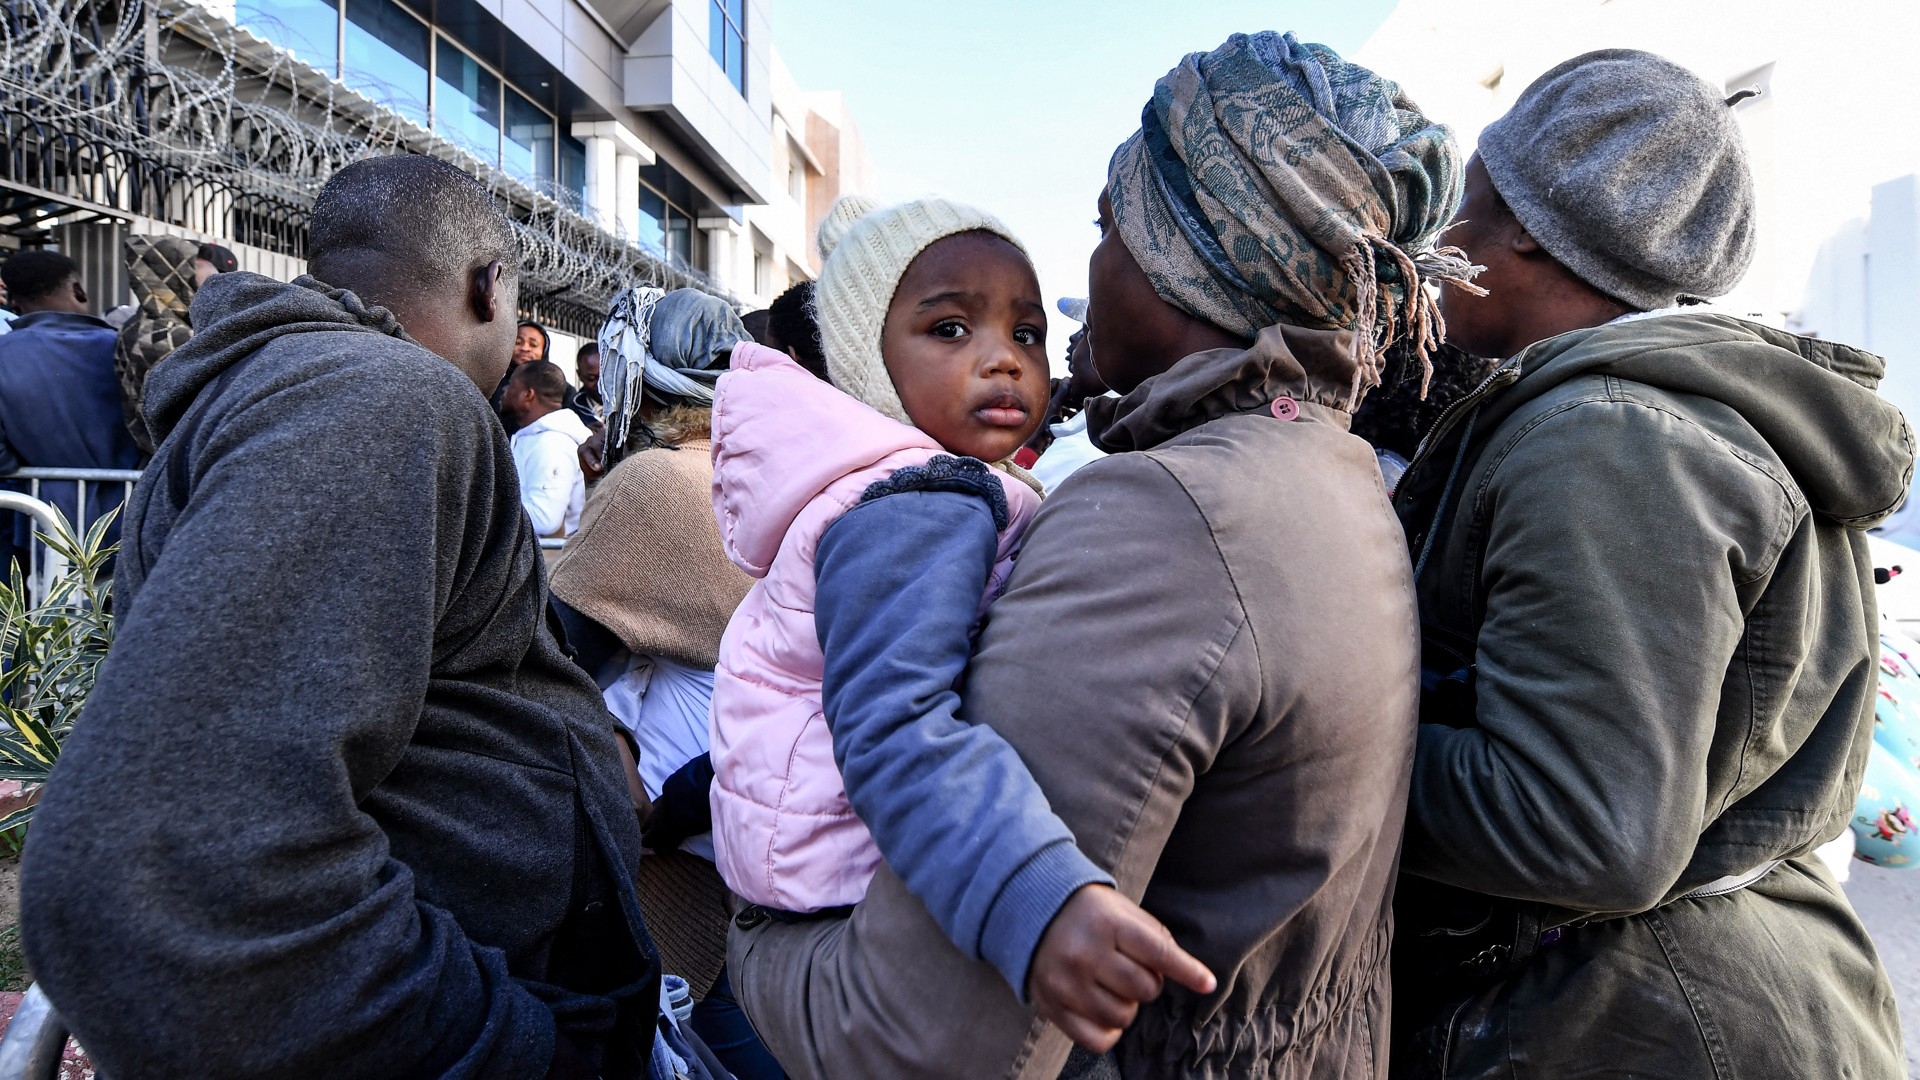 African migrants wait outside the offices of the United Nations High Commissioner for Refugees (UNHCR) in Tunis, Tunisia on 27 February 2023 (AFP)